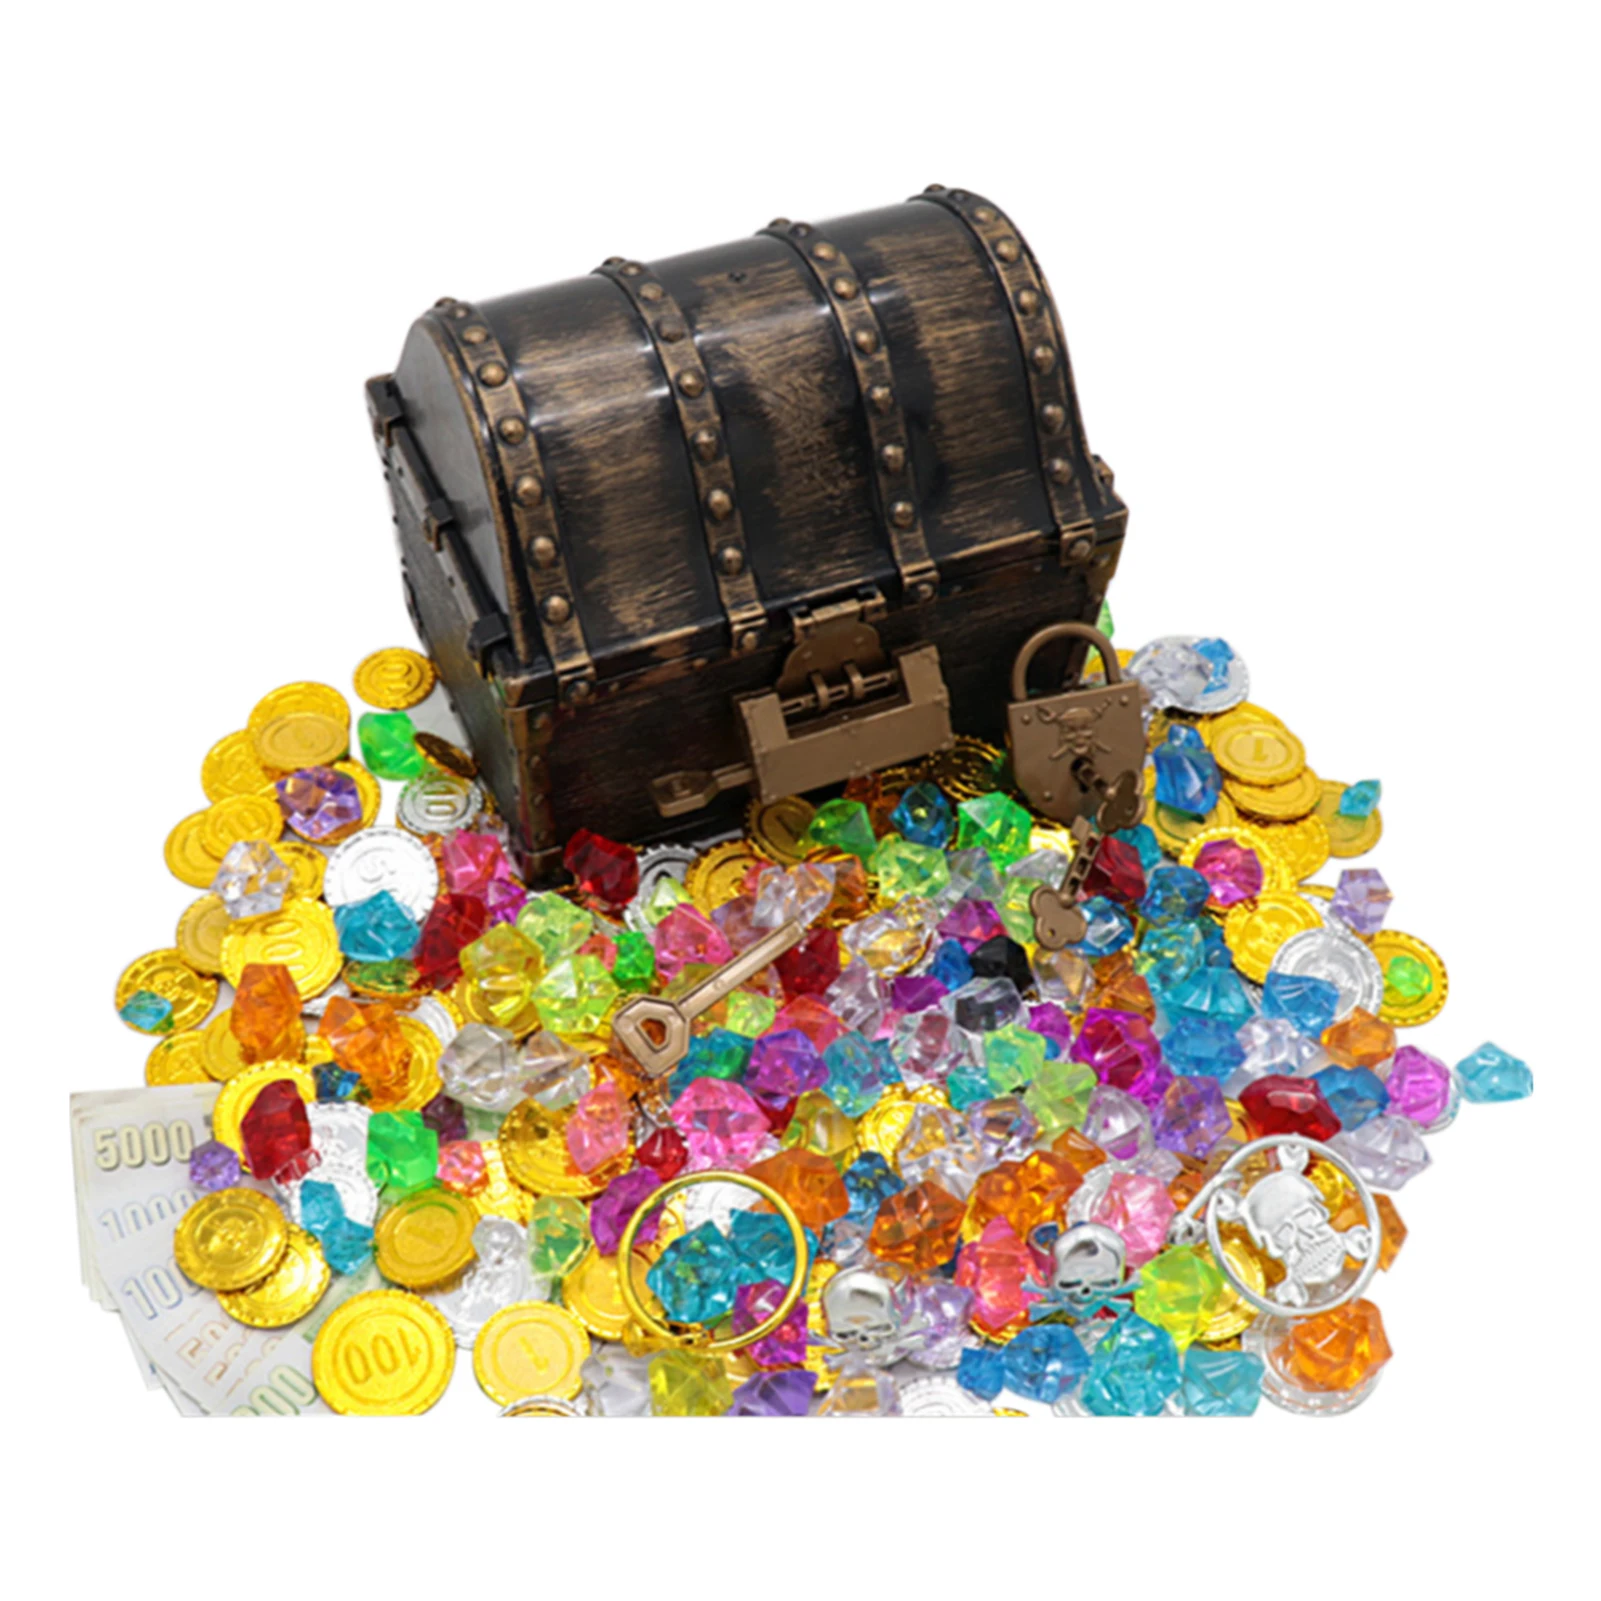 

Jewelry With Lock Rings Earrings Gems Props Antique Party Favors Playset Storage Box Trinket Kids Toy Pirate Treasure Chest Gift